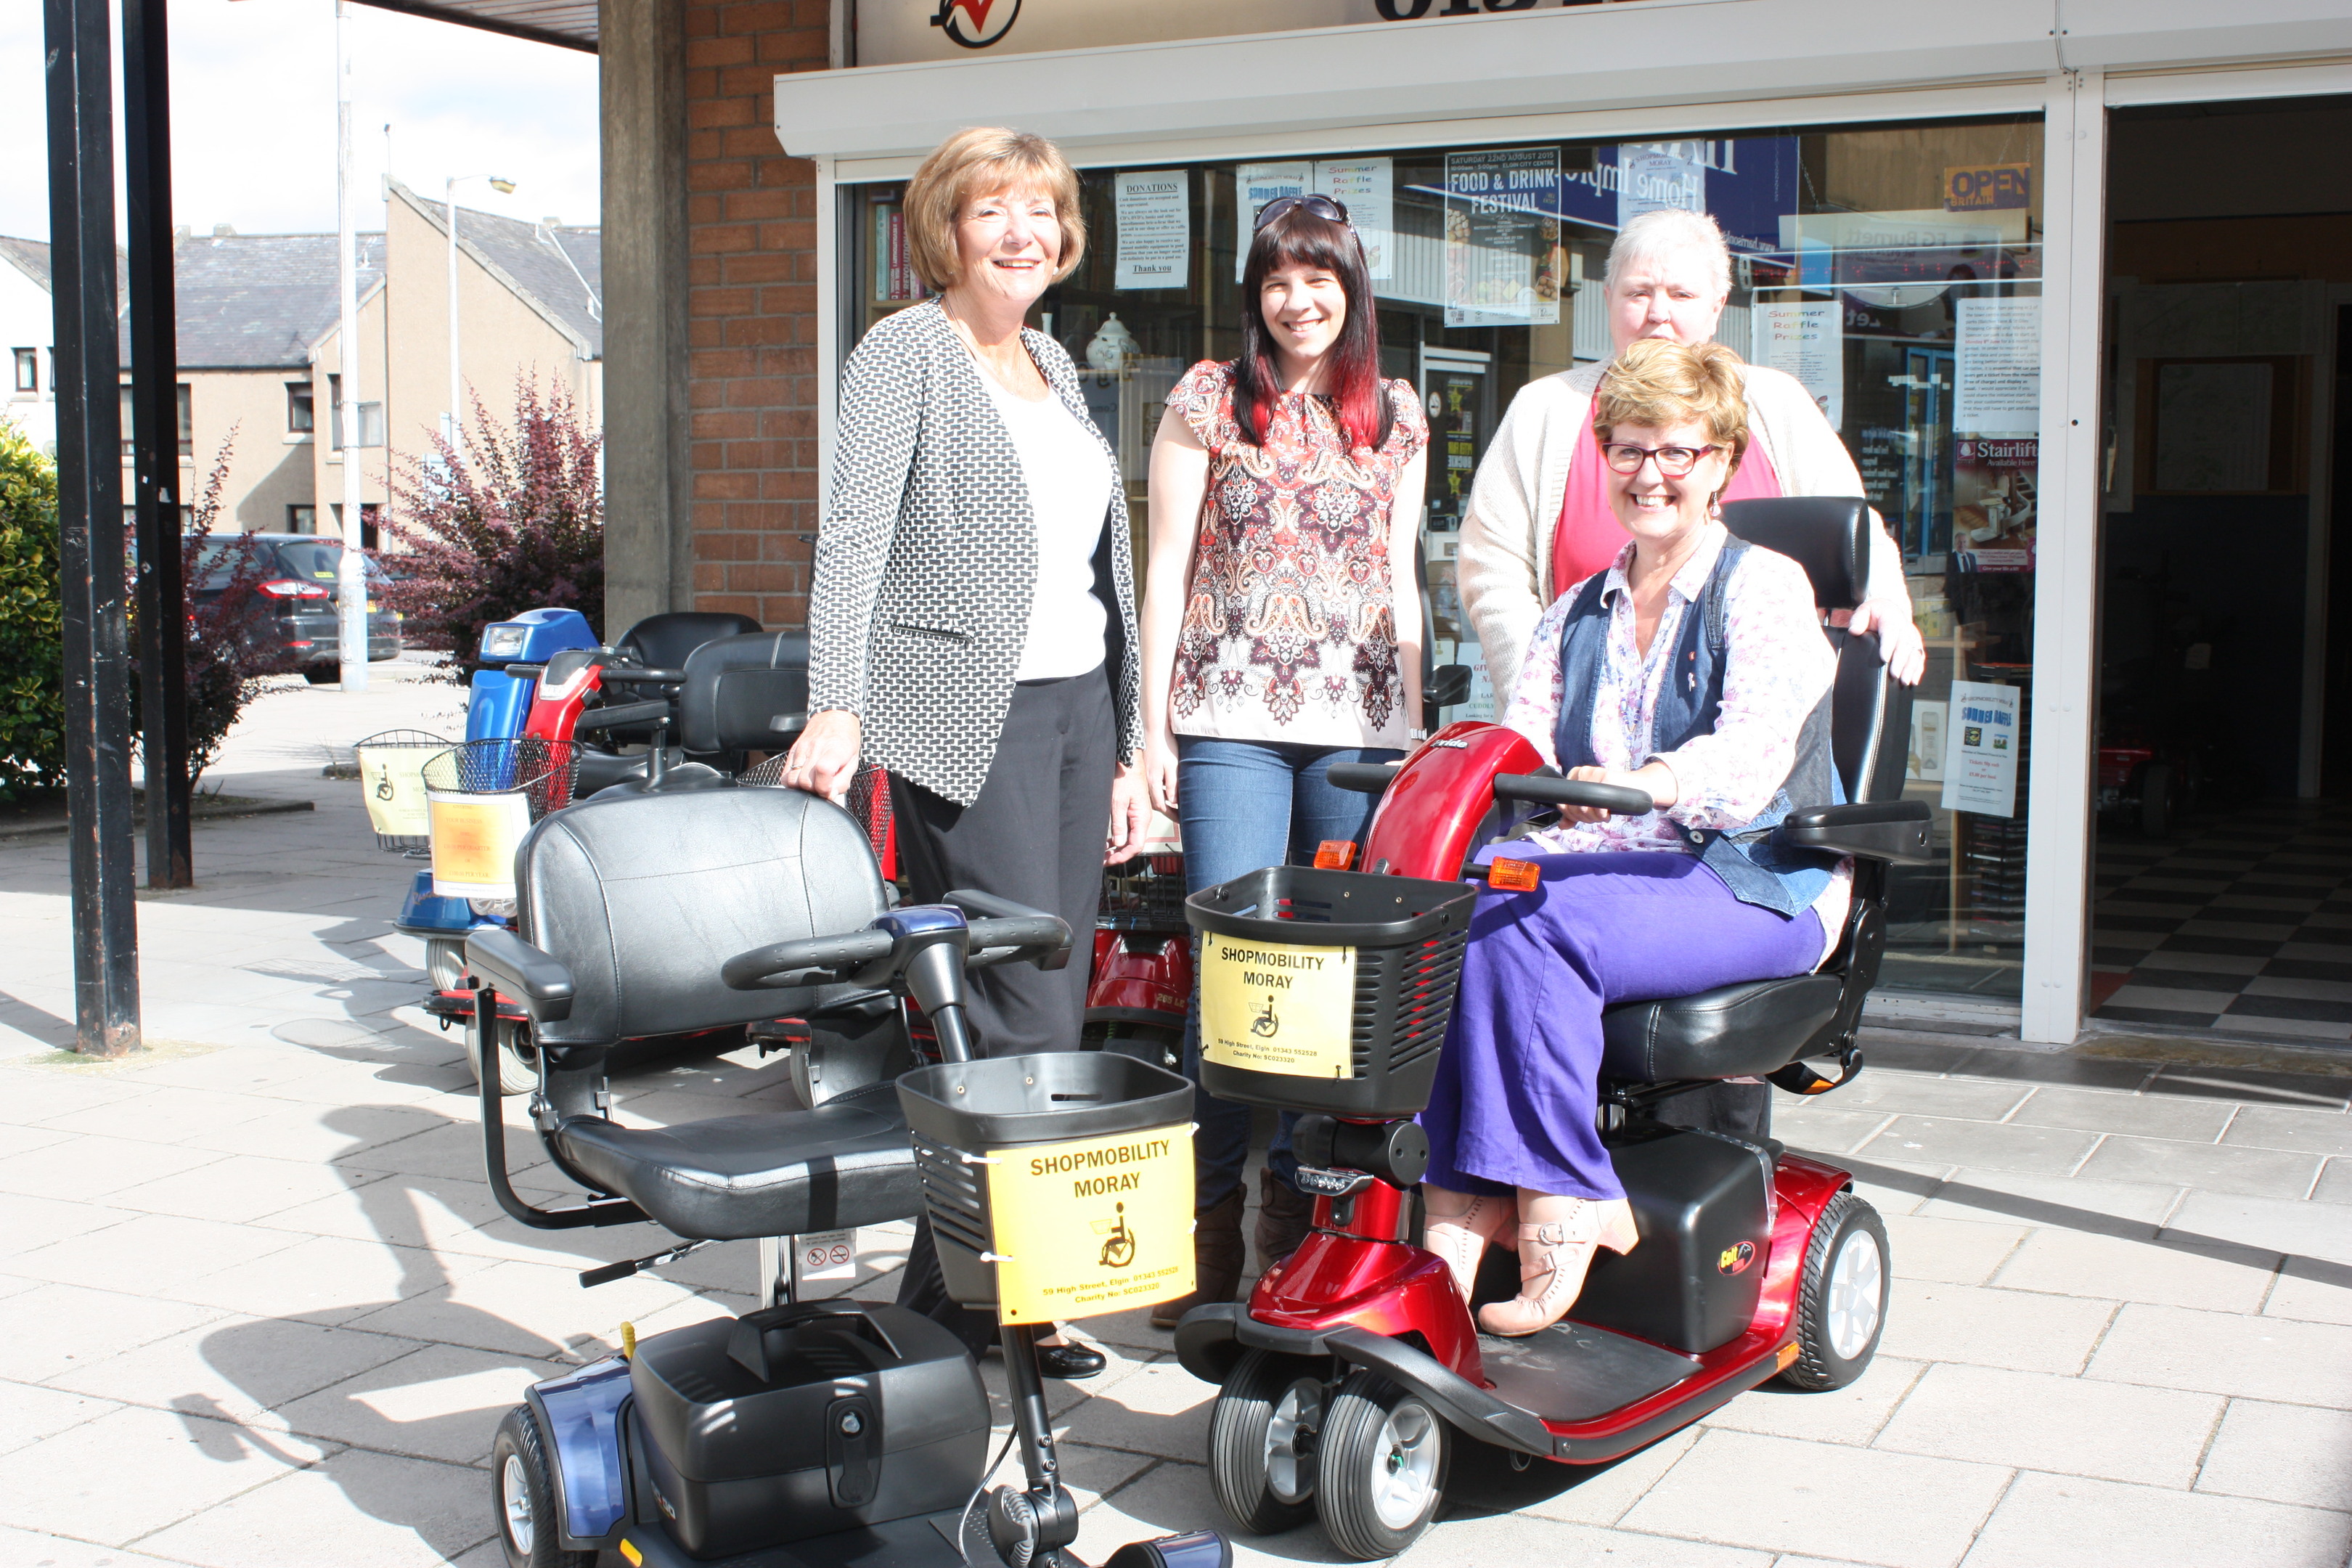 Volunteers from Shopmobility Moray, with Gordon and Ena Baxter Foundation's Kay Jackson